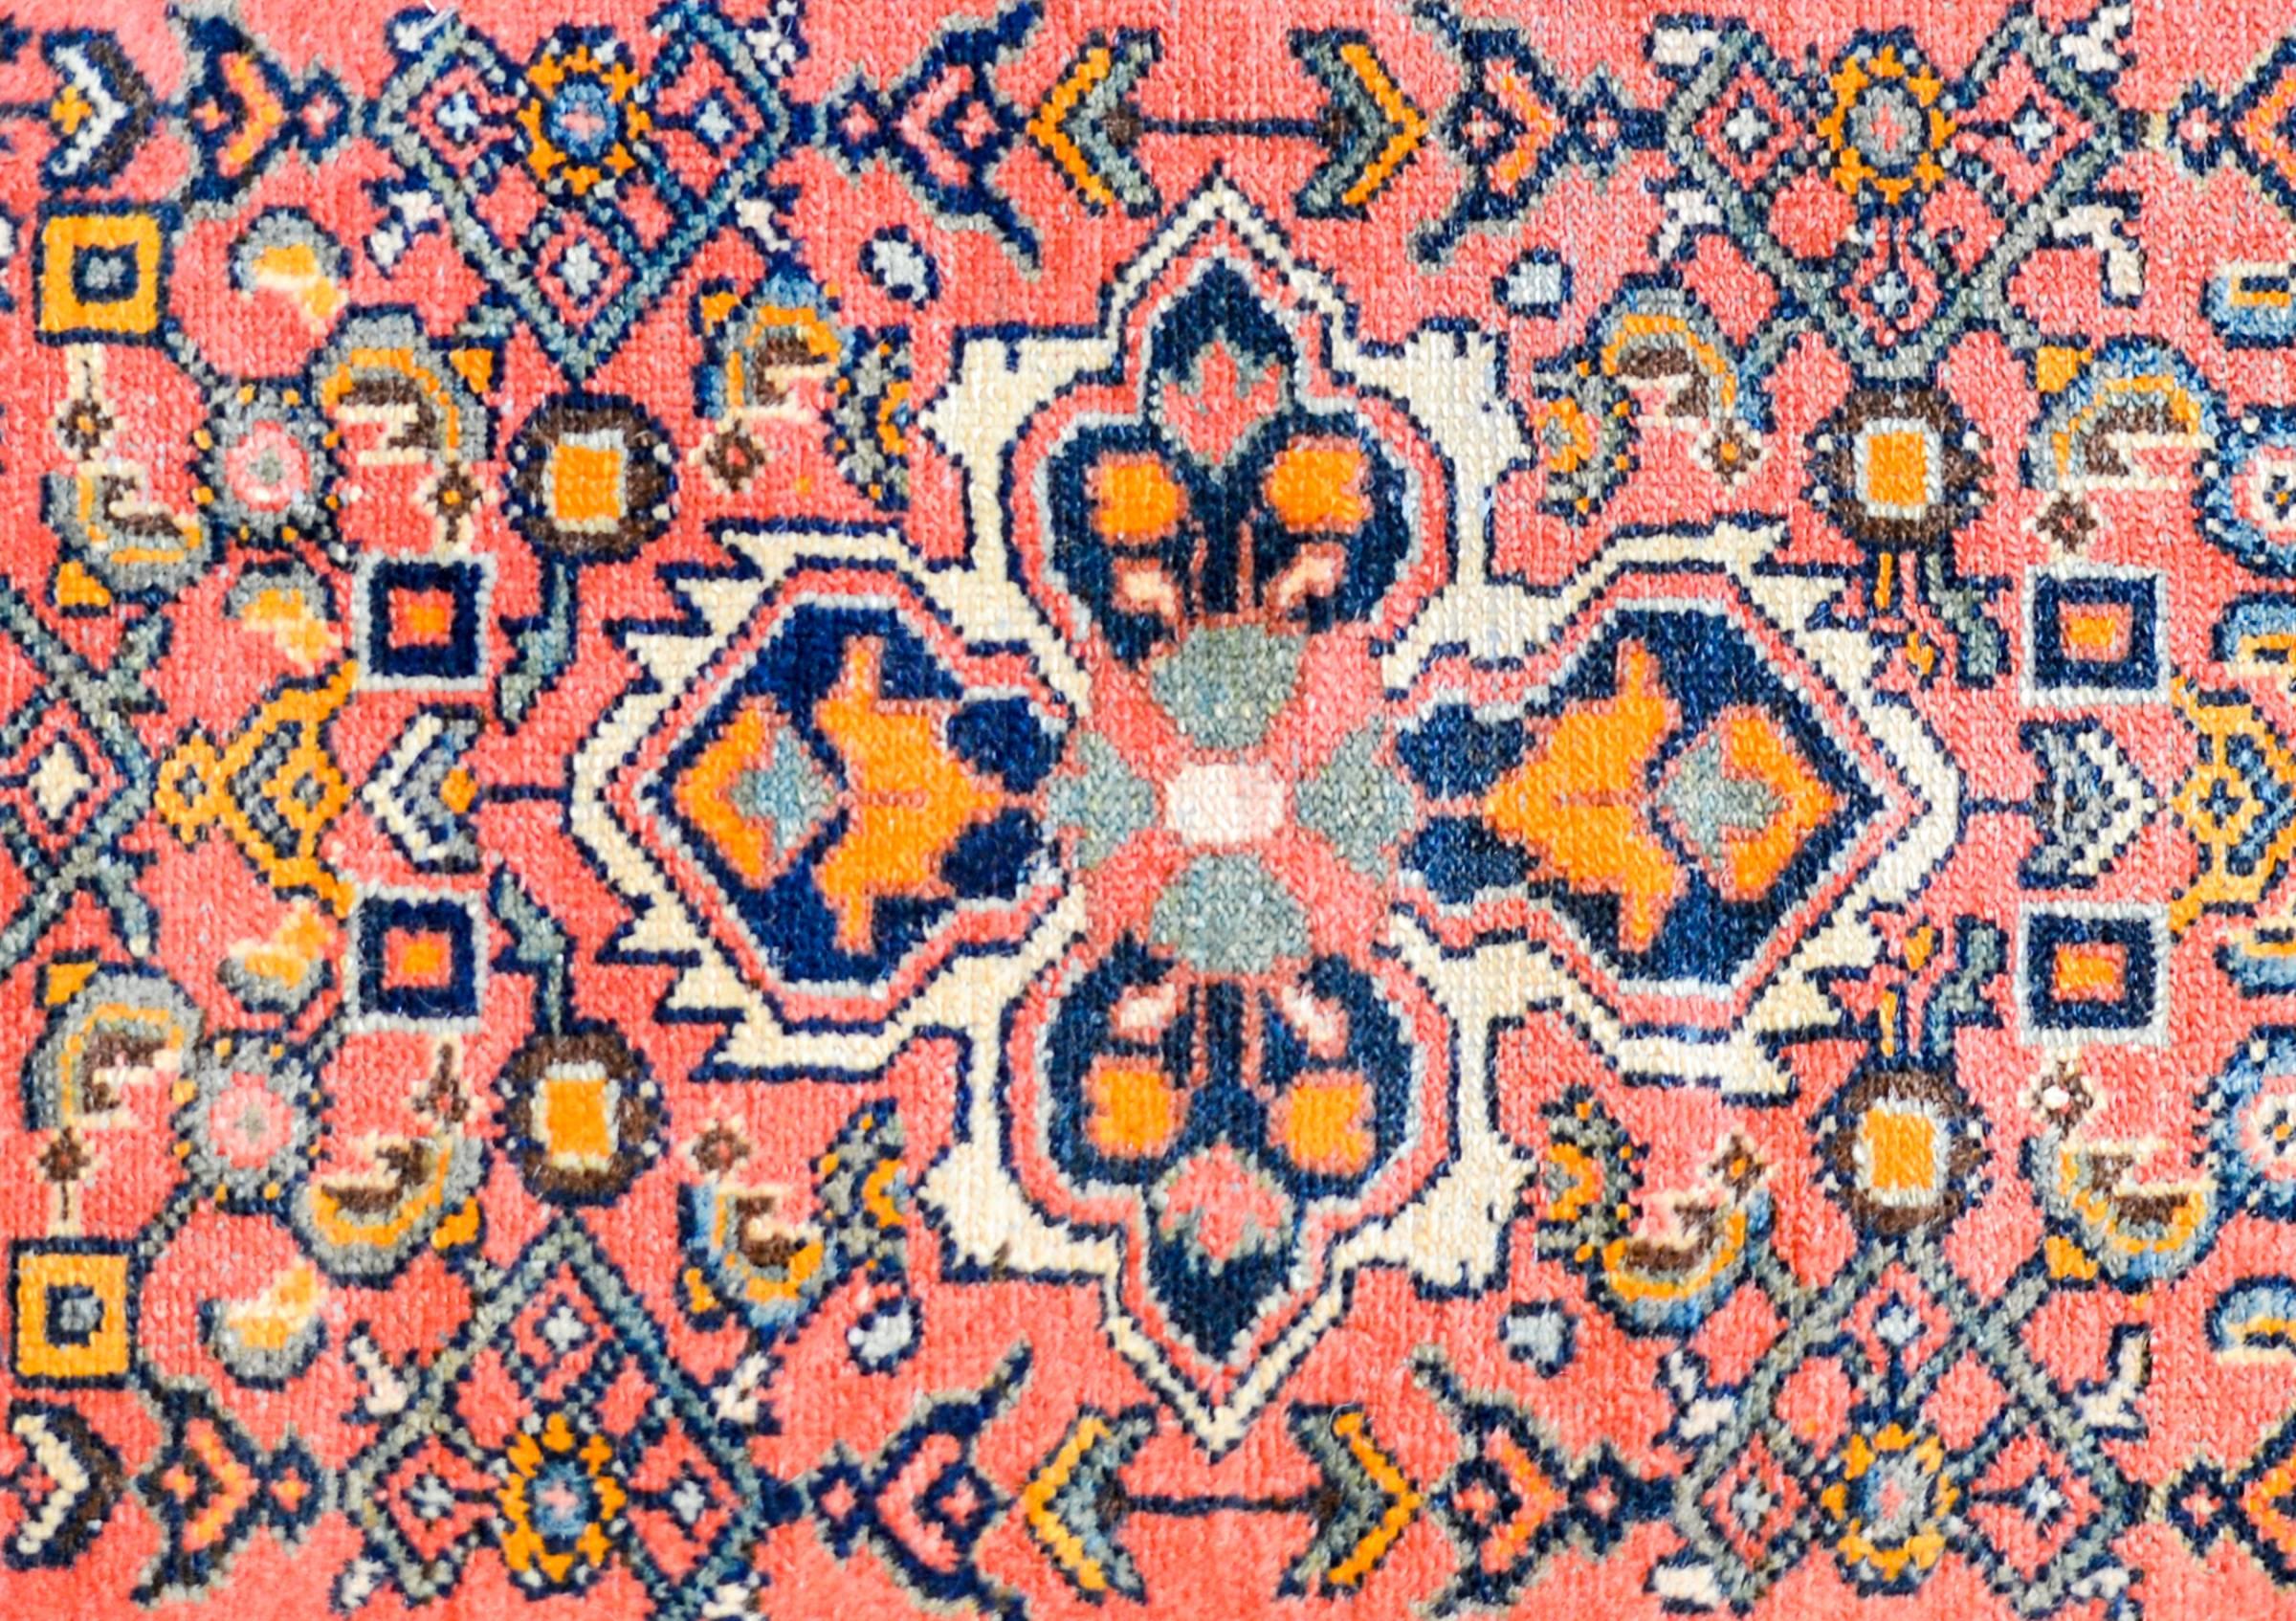 A wonderful mid-20th century Persian Hamadan rug with a four-lobed floral medallion woven in indigo, orange, pale green, and white amidst a field of flowers and trellis designs on a pale pink background. The border is complex with a large-scale